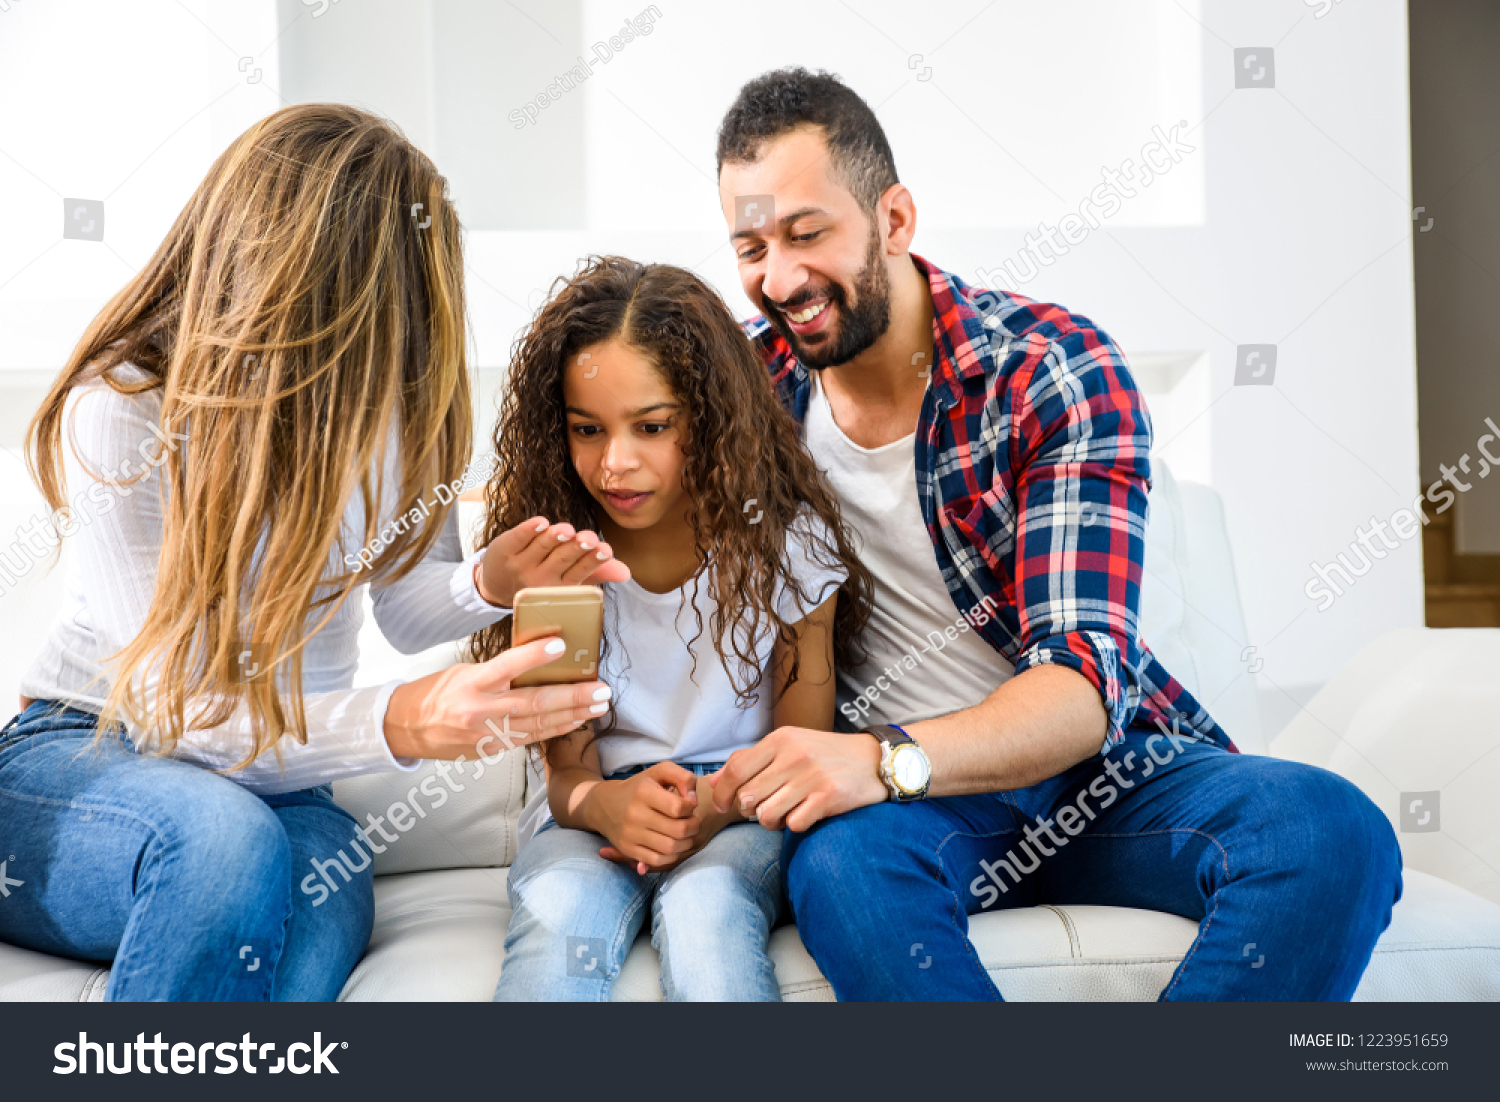 Young parents sitting on the couch with their daughter and all of them looking at a smartphone
 #1223951659